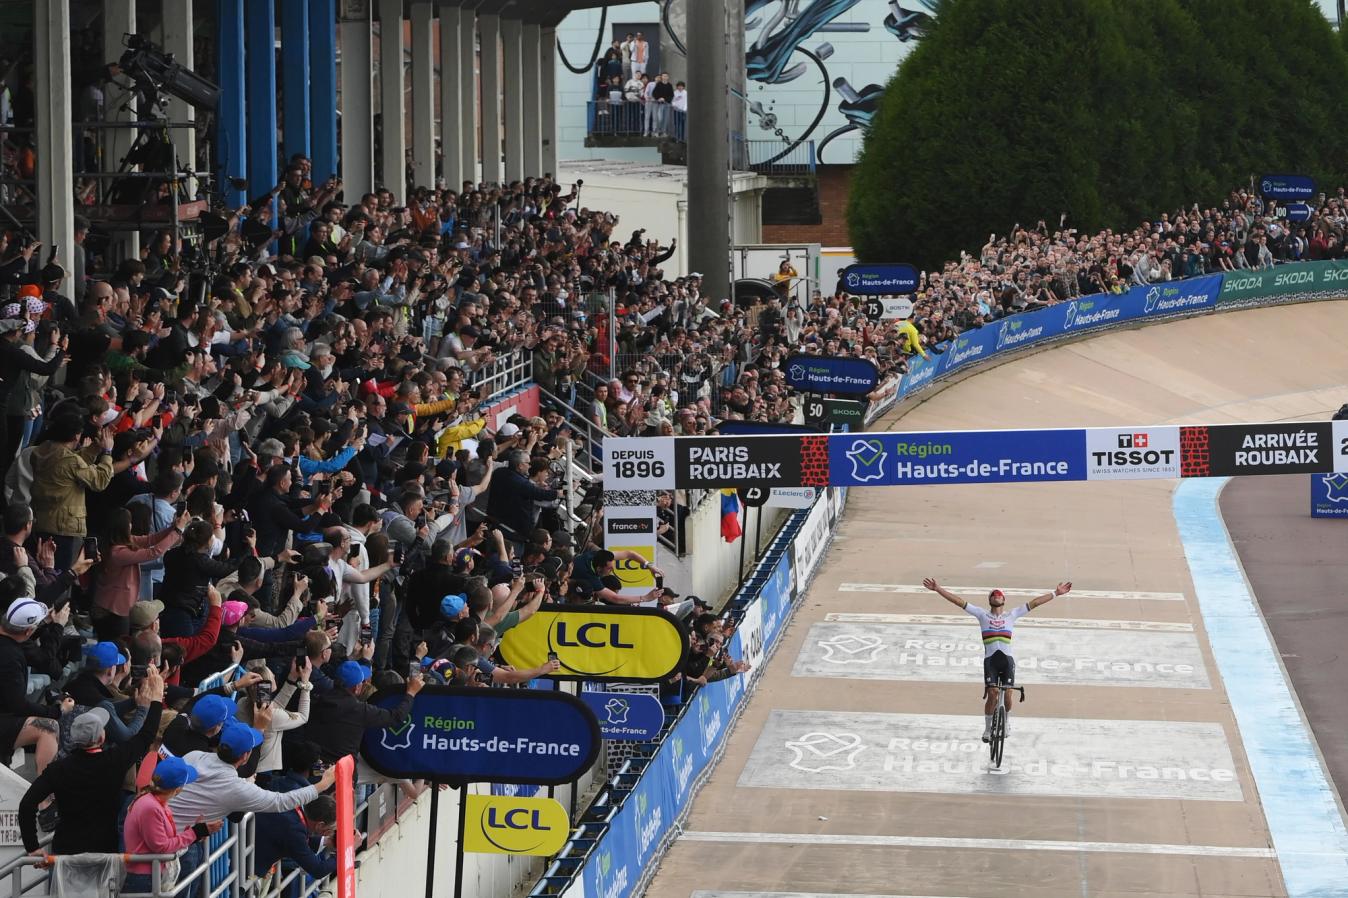 The Roubaix crowd marvelled at the genius of the two-time Paris-Roubaix champion